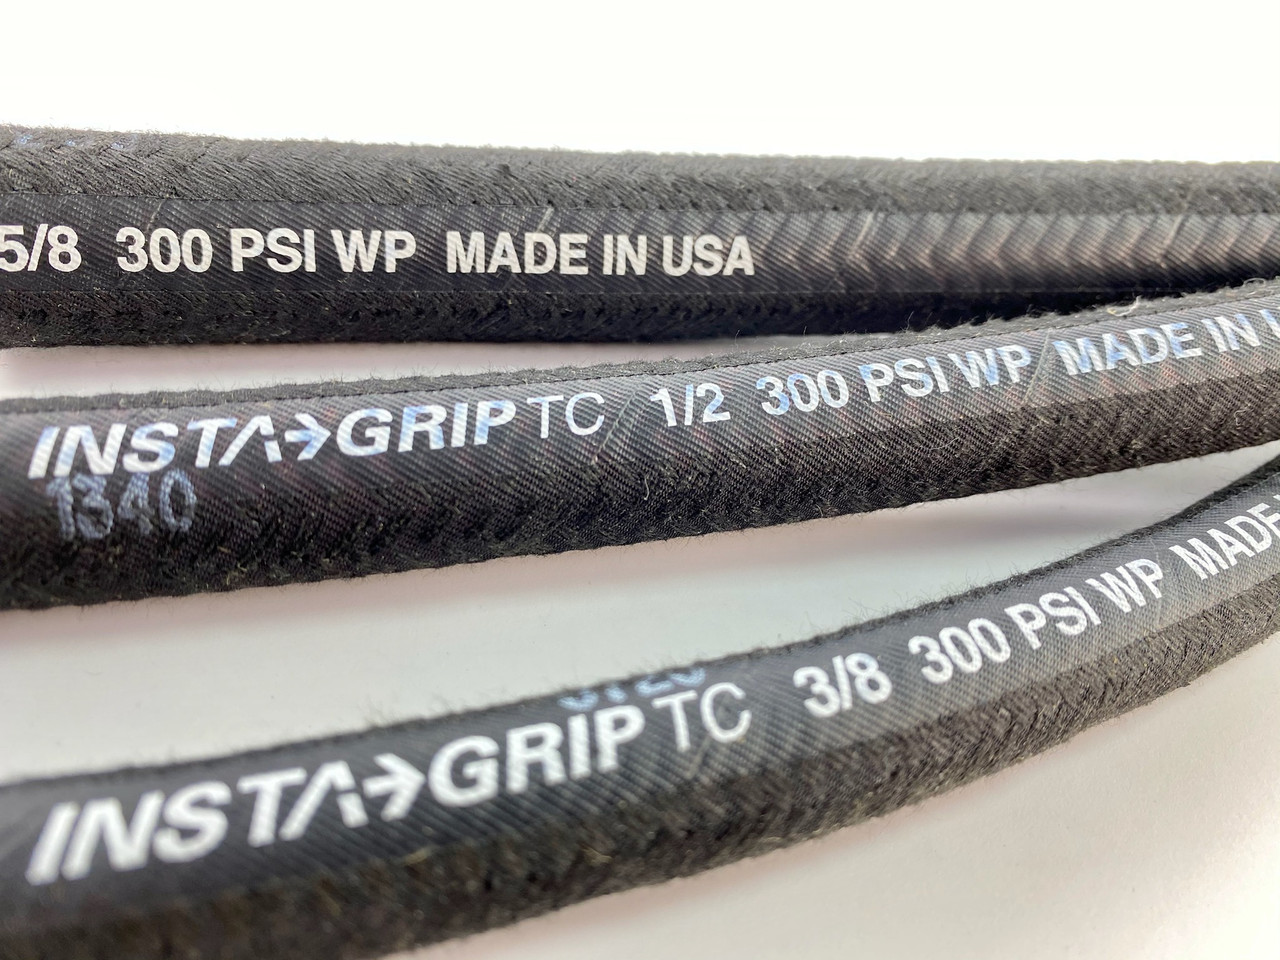 Continental Insta-Grip™ TC 3/8 Oil Resistant Braided Hose 300 PSI - UPR  Products